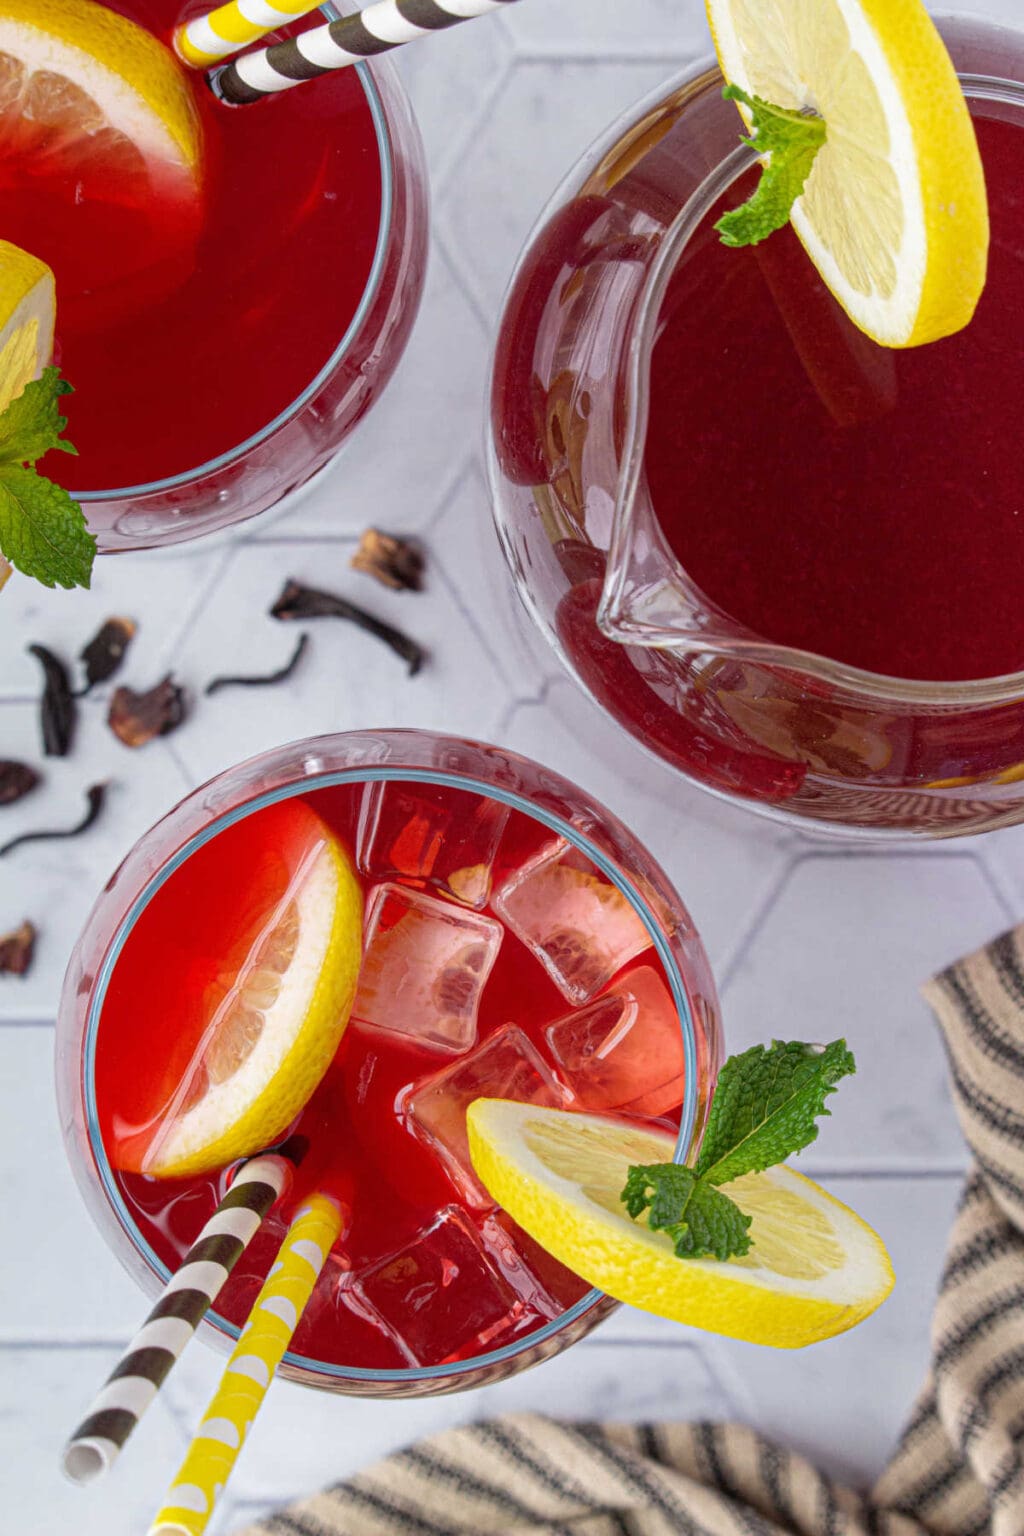 Hibiscus Lemonade Recipe (Add Vodka for a Cocktail) - Restless Chipotle